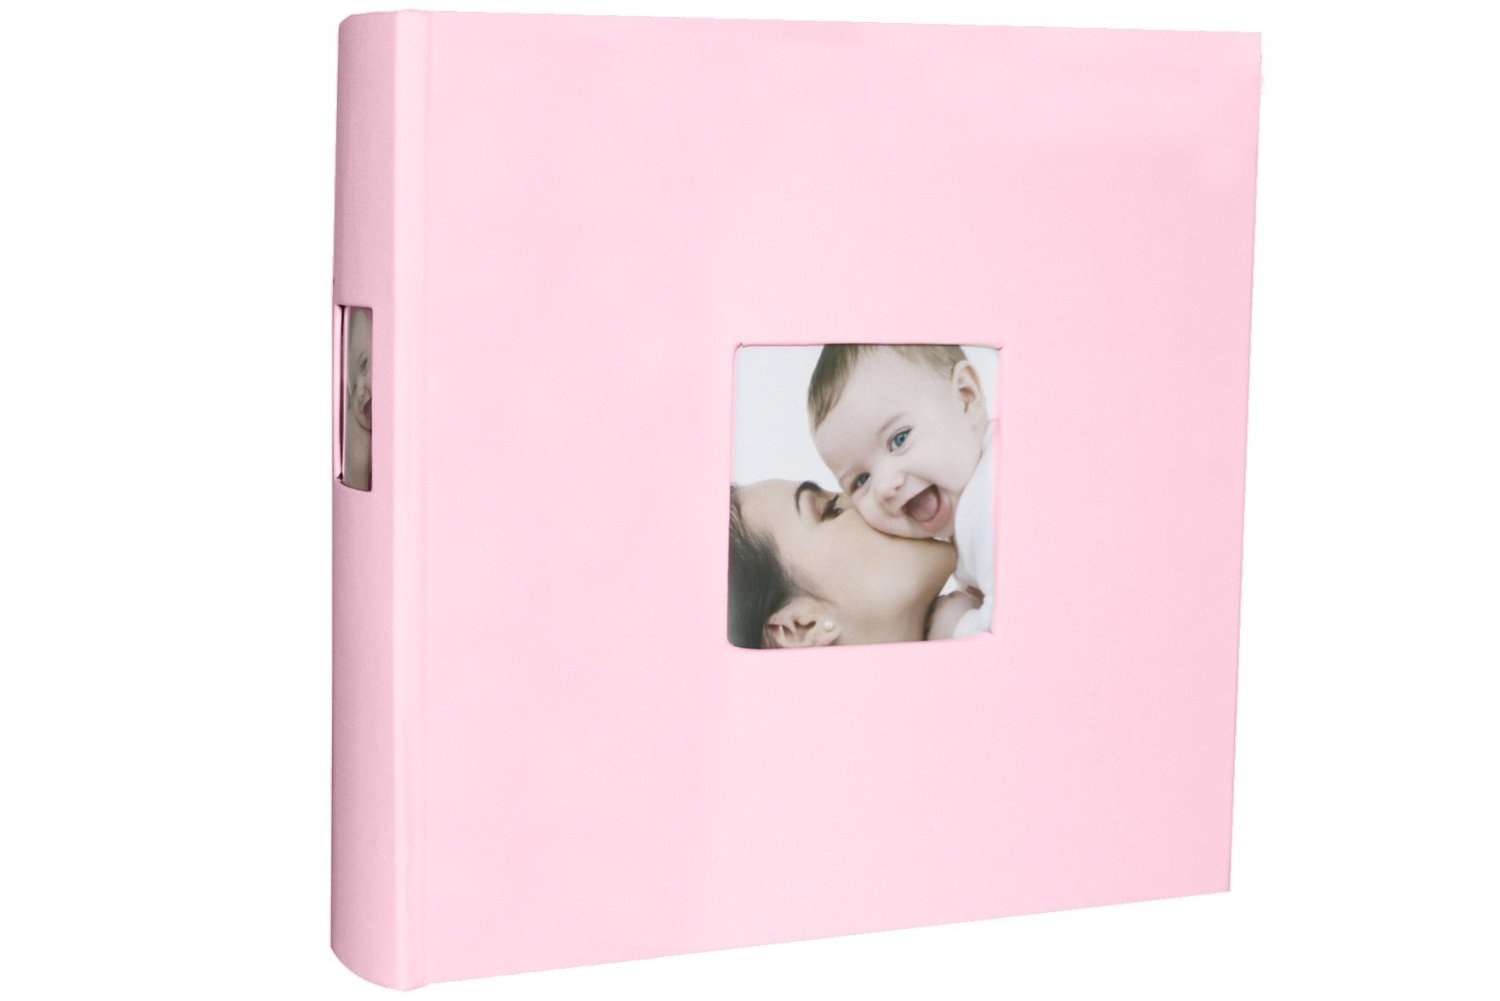 Babuqee Pink Baby Photo Album 200 Photos 102 x 153mm RRP £14.99 CLEARANCE XL £9.99